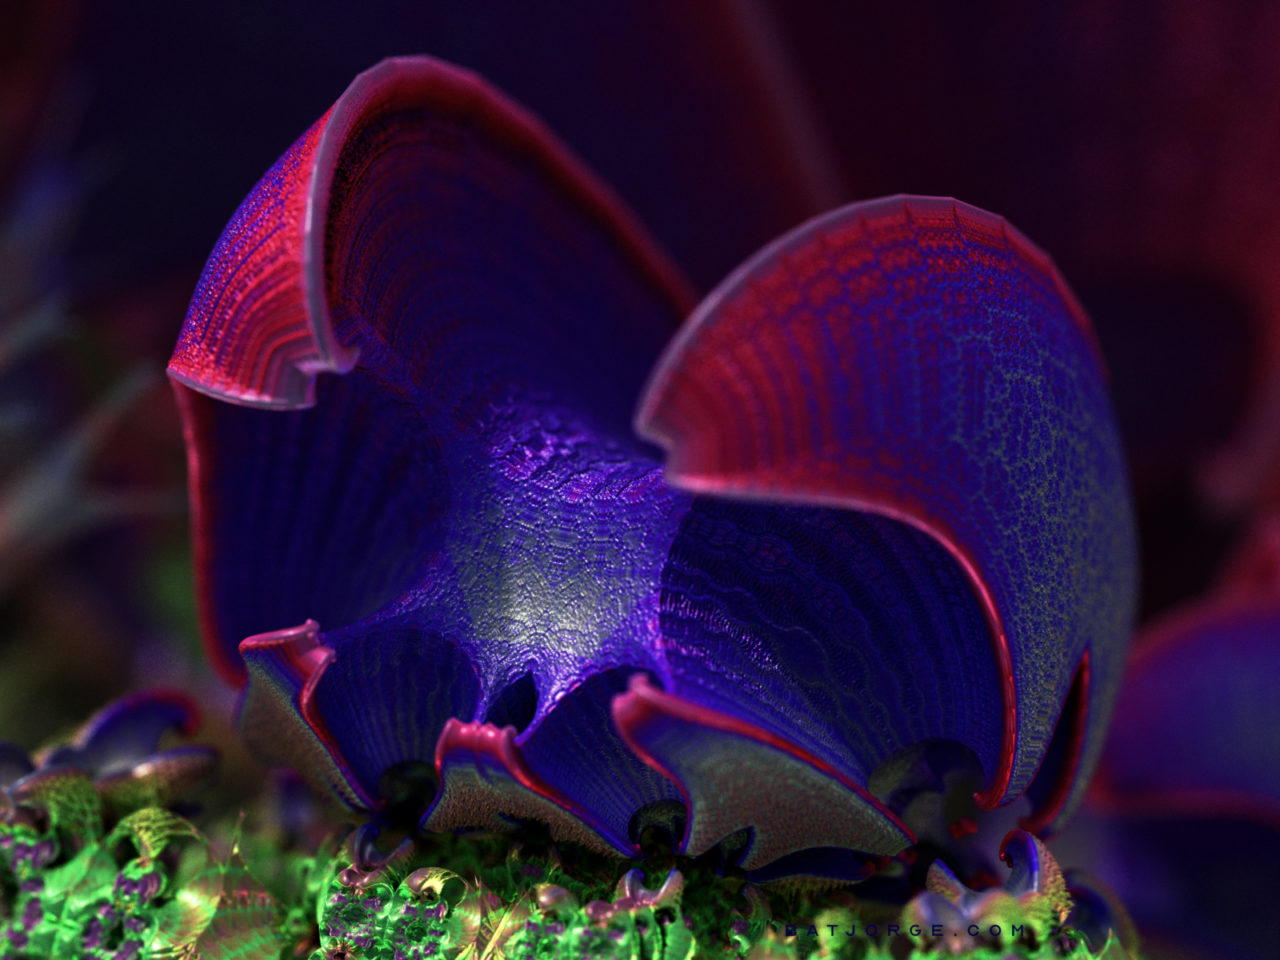 abstract 3d fractal image with red and purple colours. flower-like.